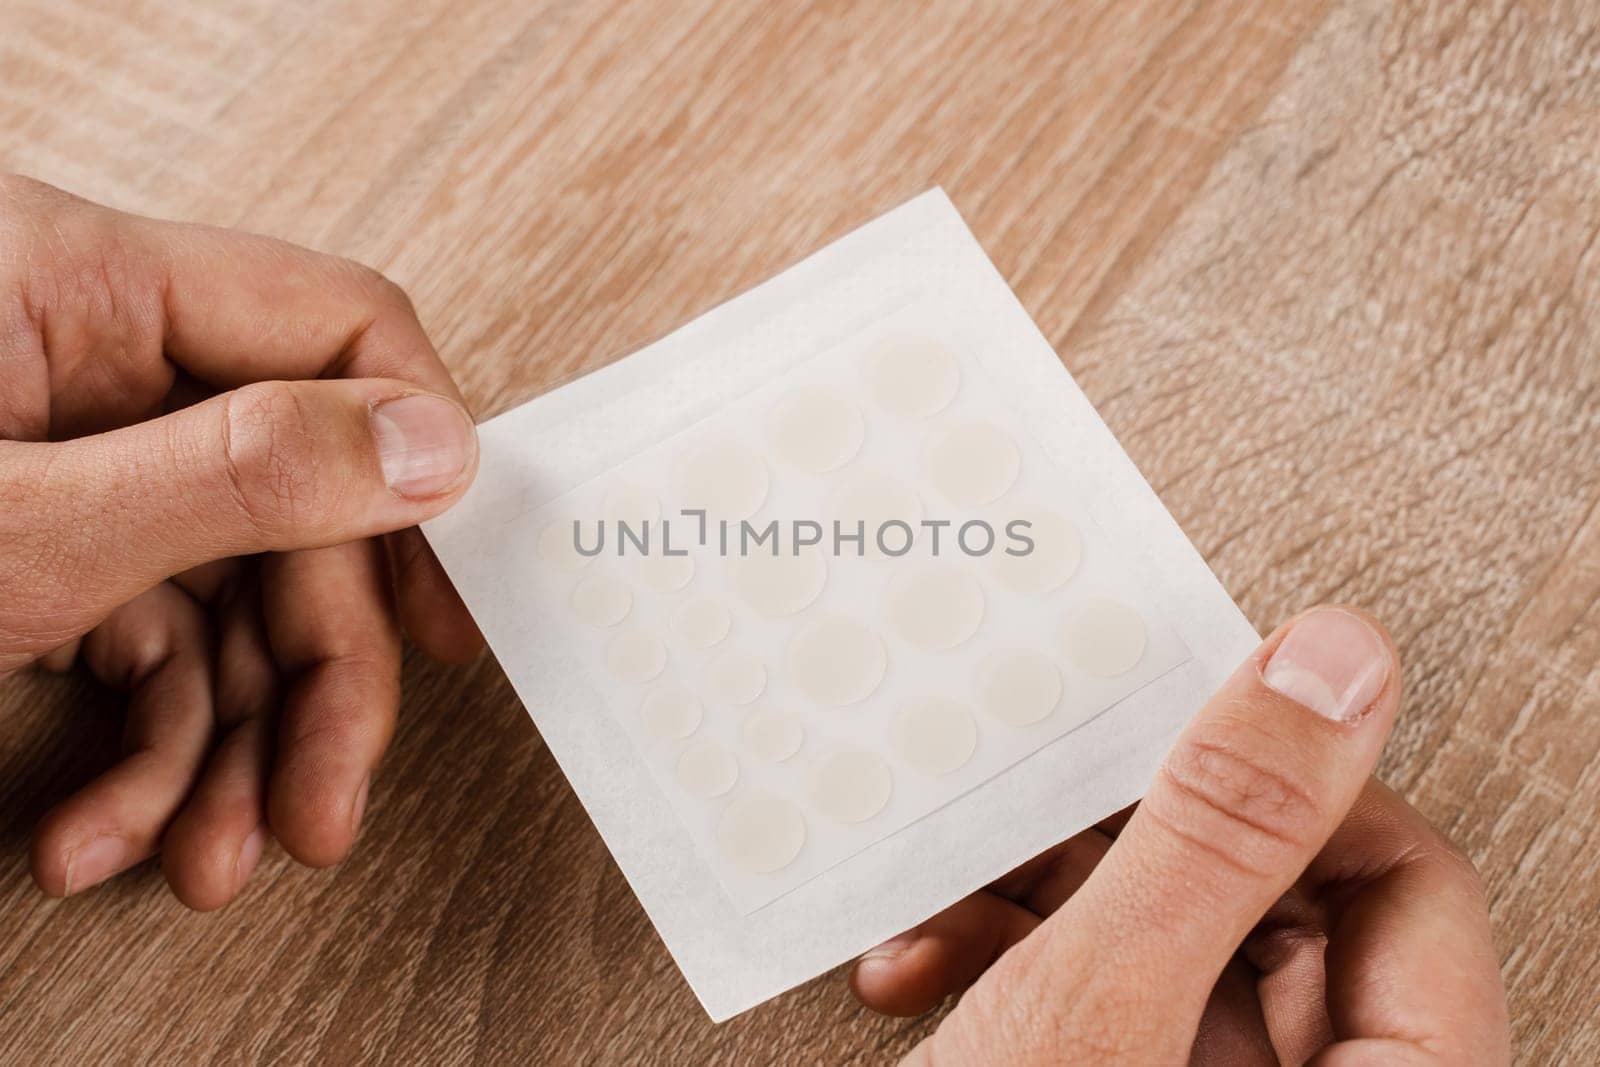 Set of round patches for acne in hands on wooden background. Close-up acne patch for facial rejuvenation. Facial cleansing cosmetology. by Rabizo